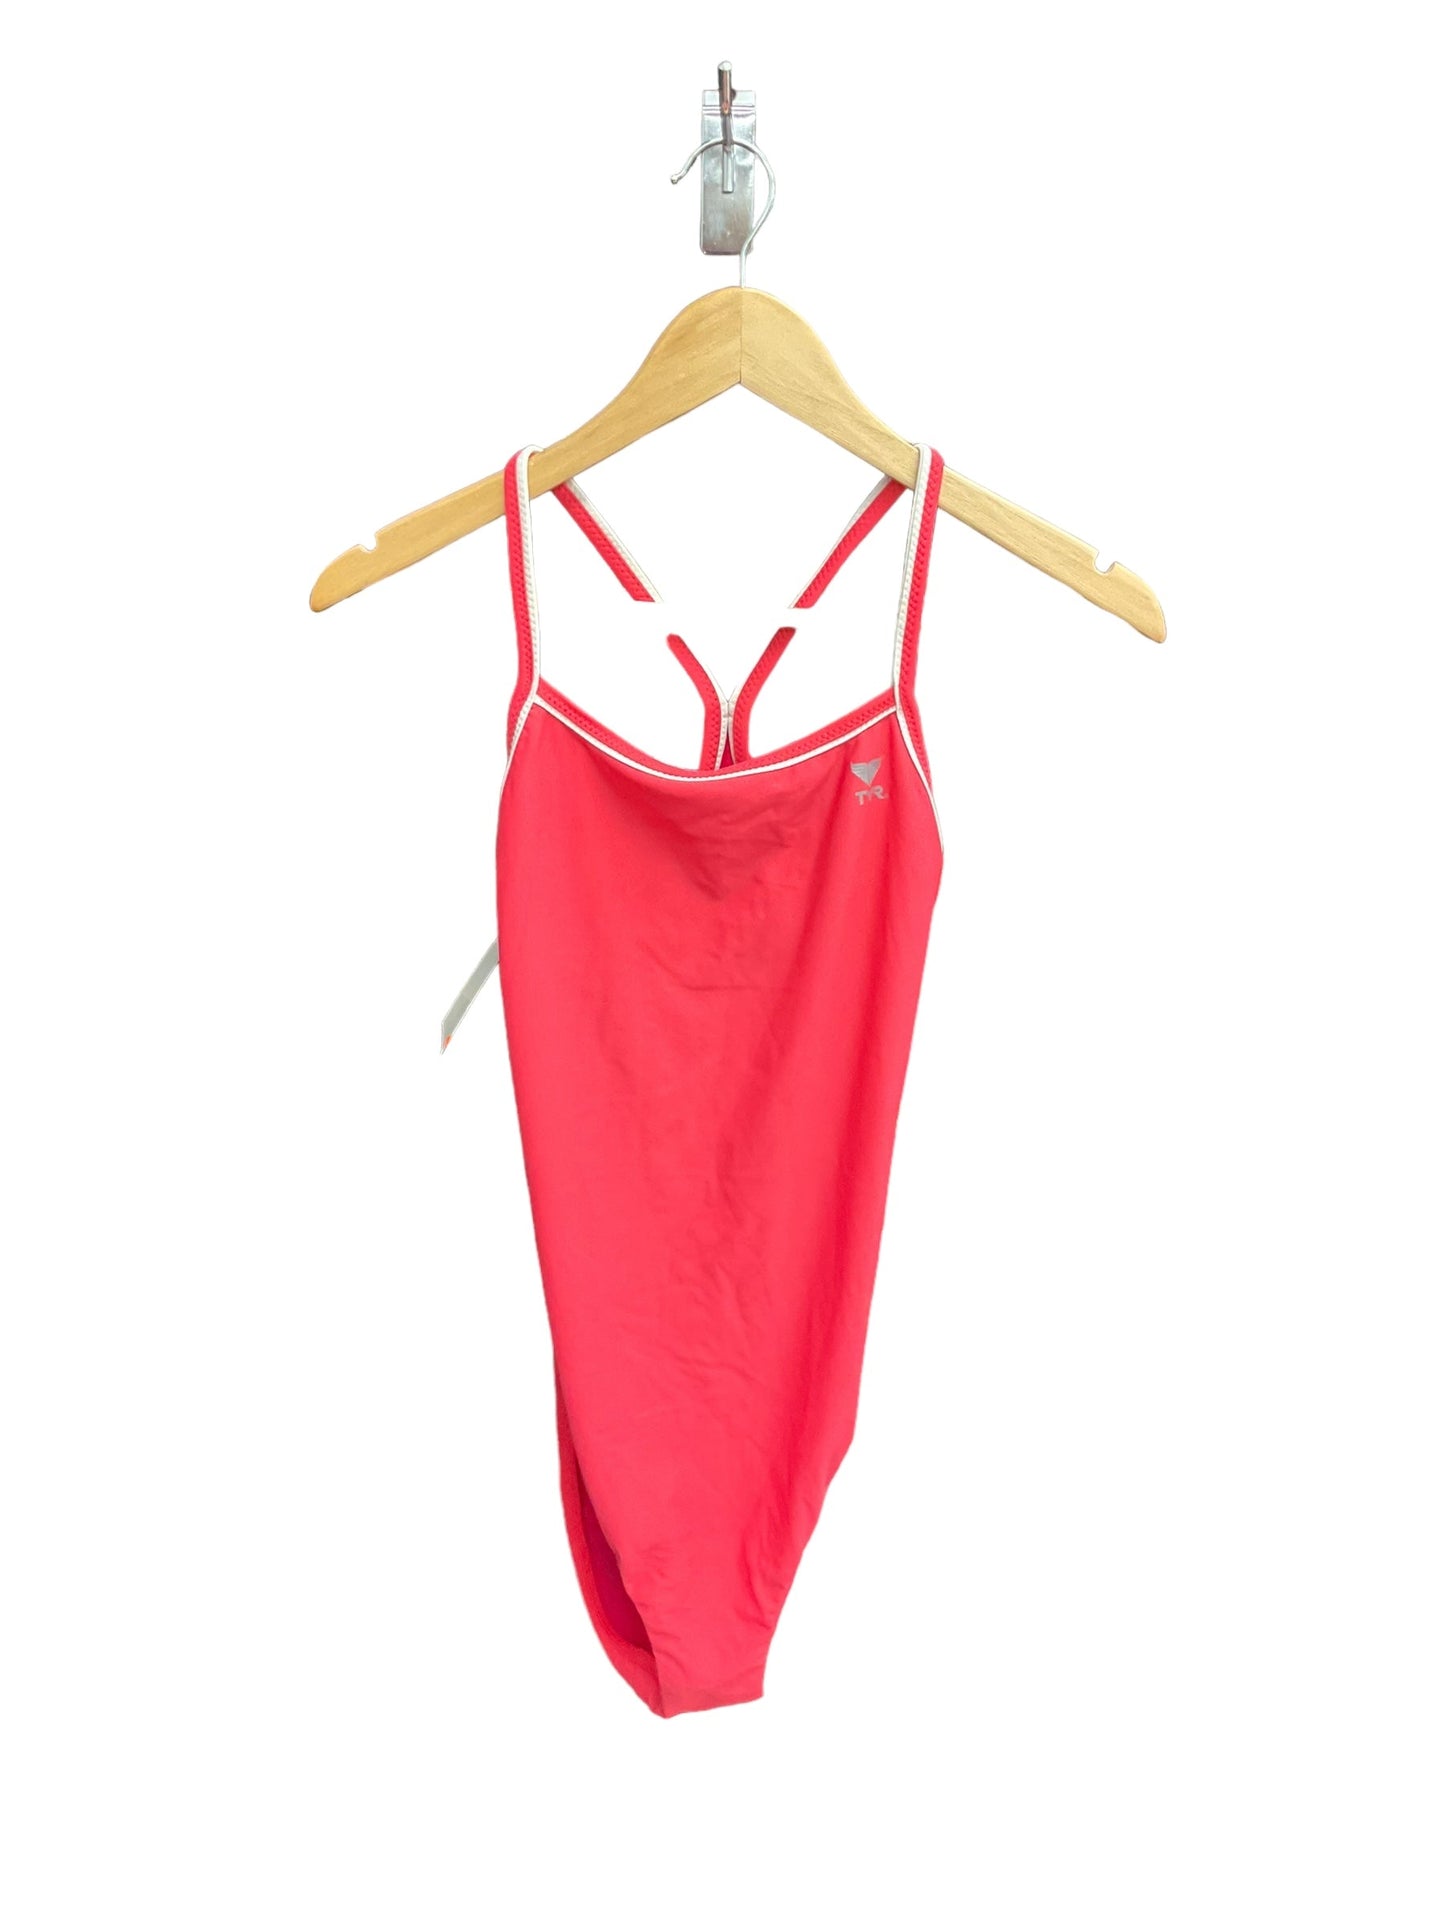 Coral Swimsuit Clothes Mentor, Size Xl